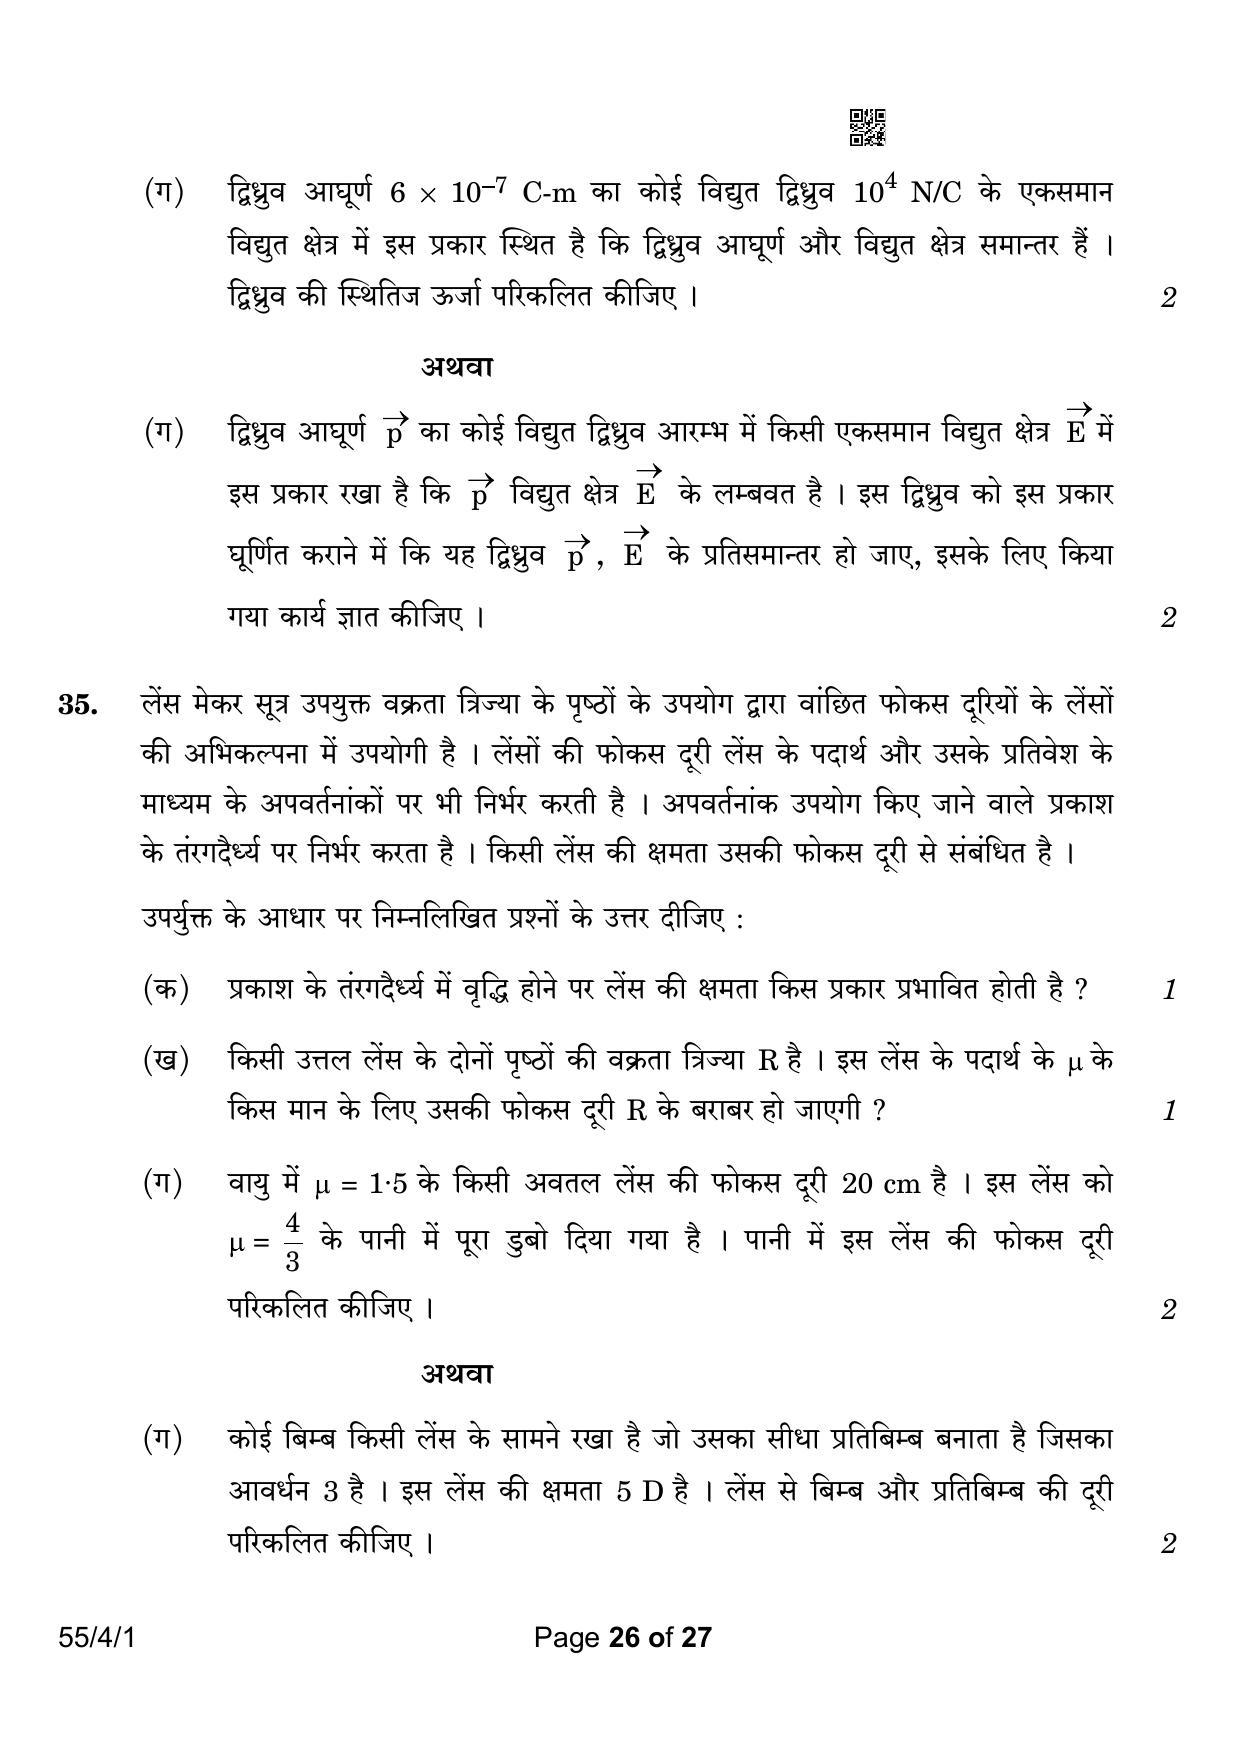 CBSE Class 12 55-4-1 Physics 2023 Question Paper - Page 26